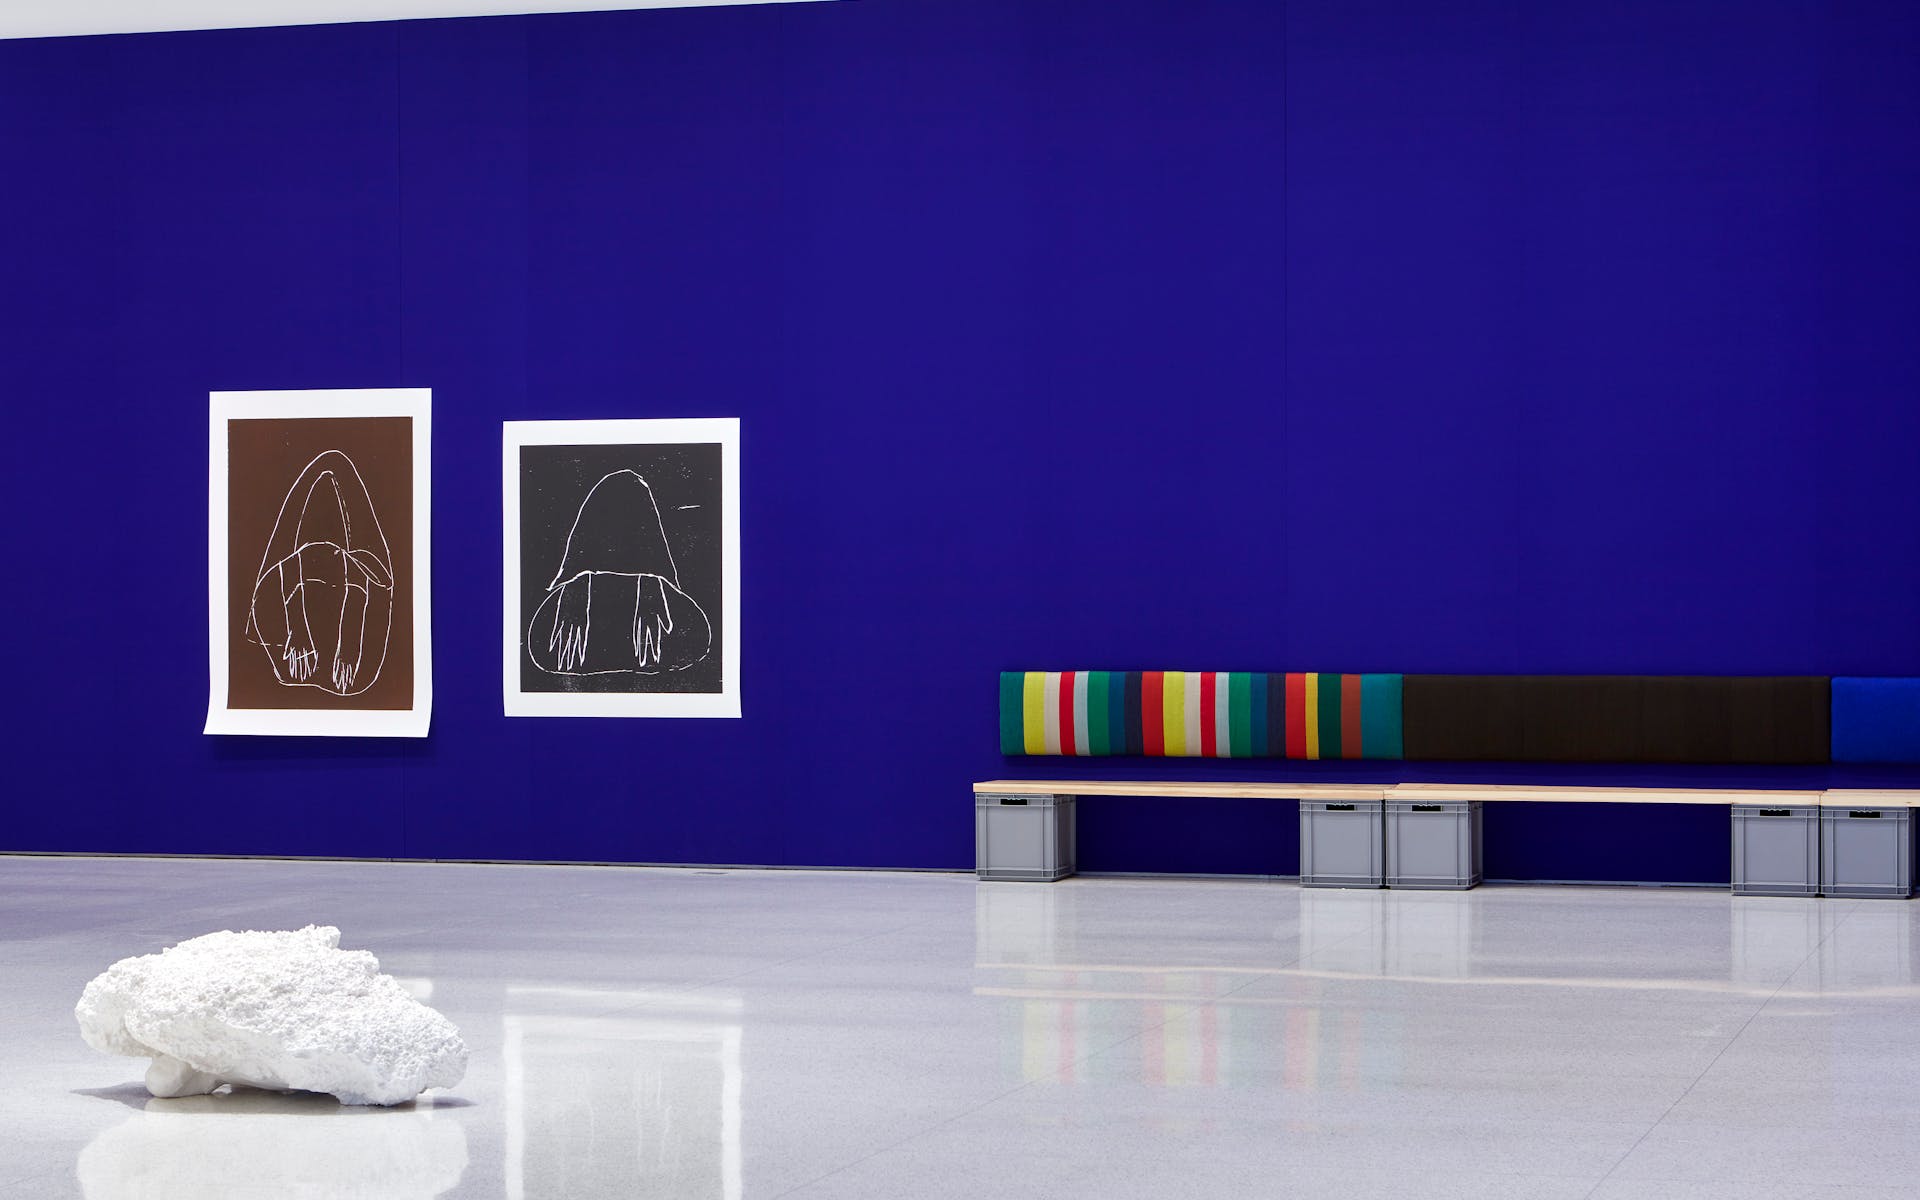 View of the exhibition Andrea Büttner, 2015